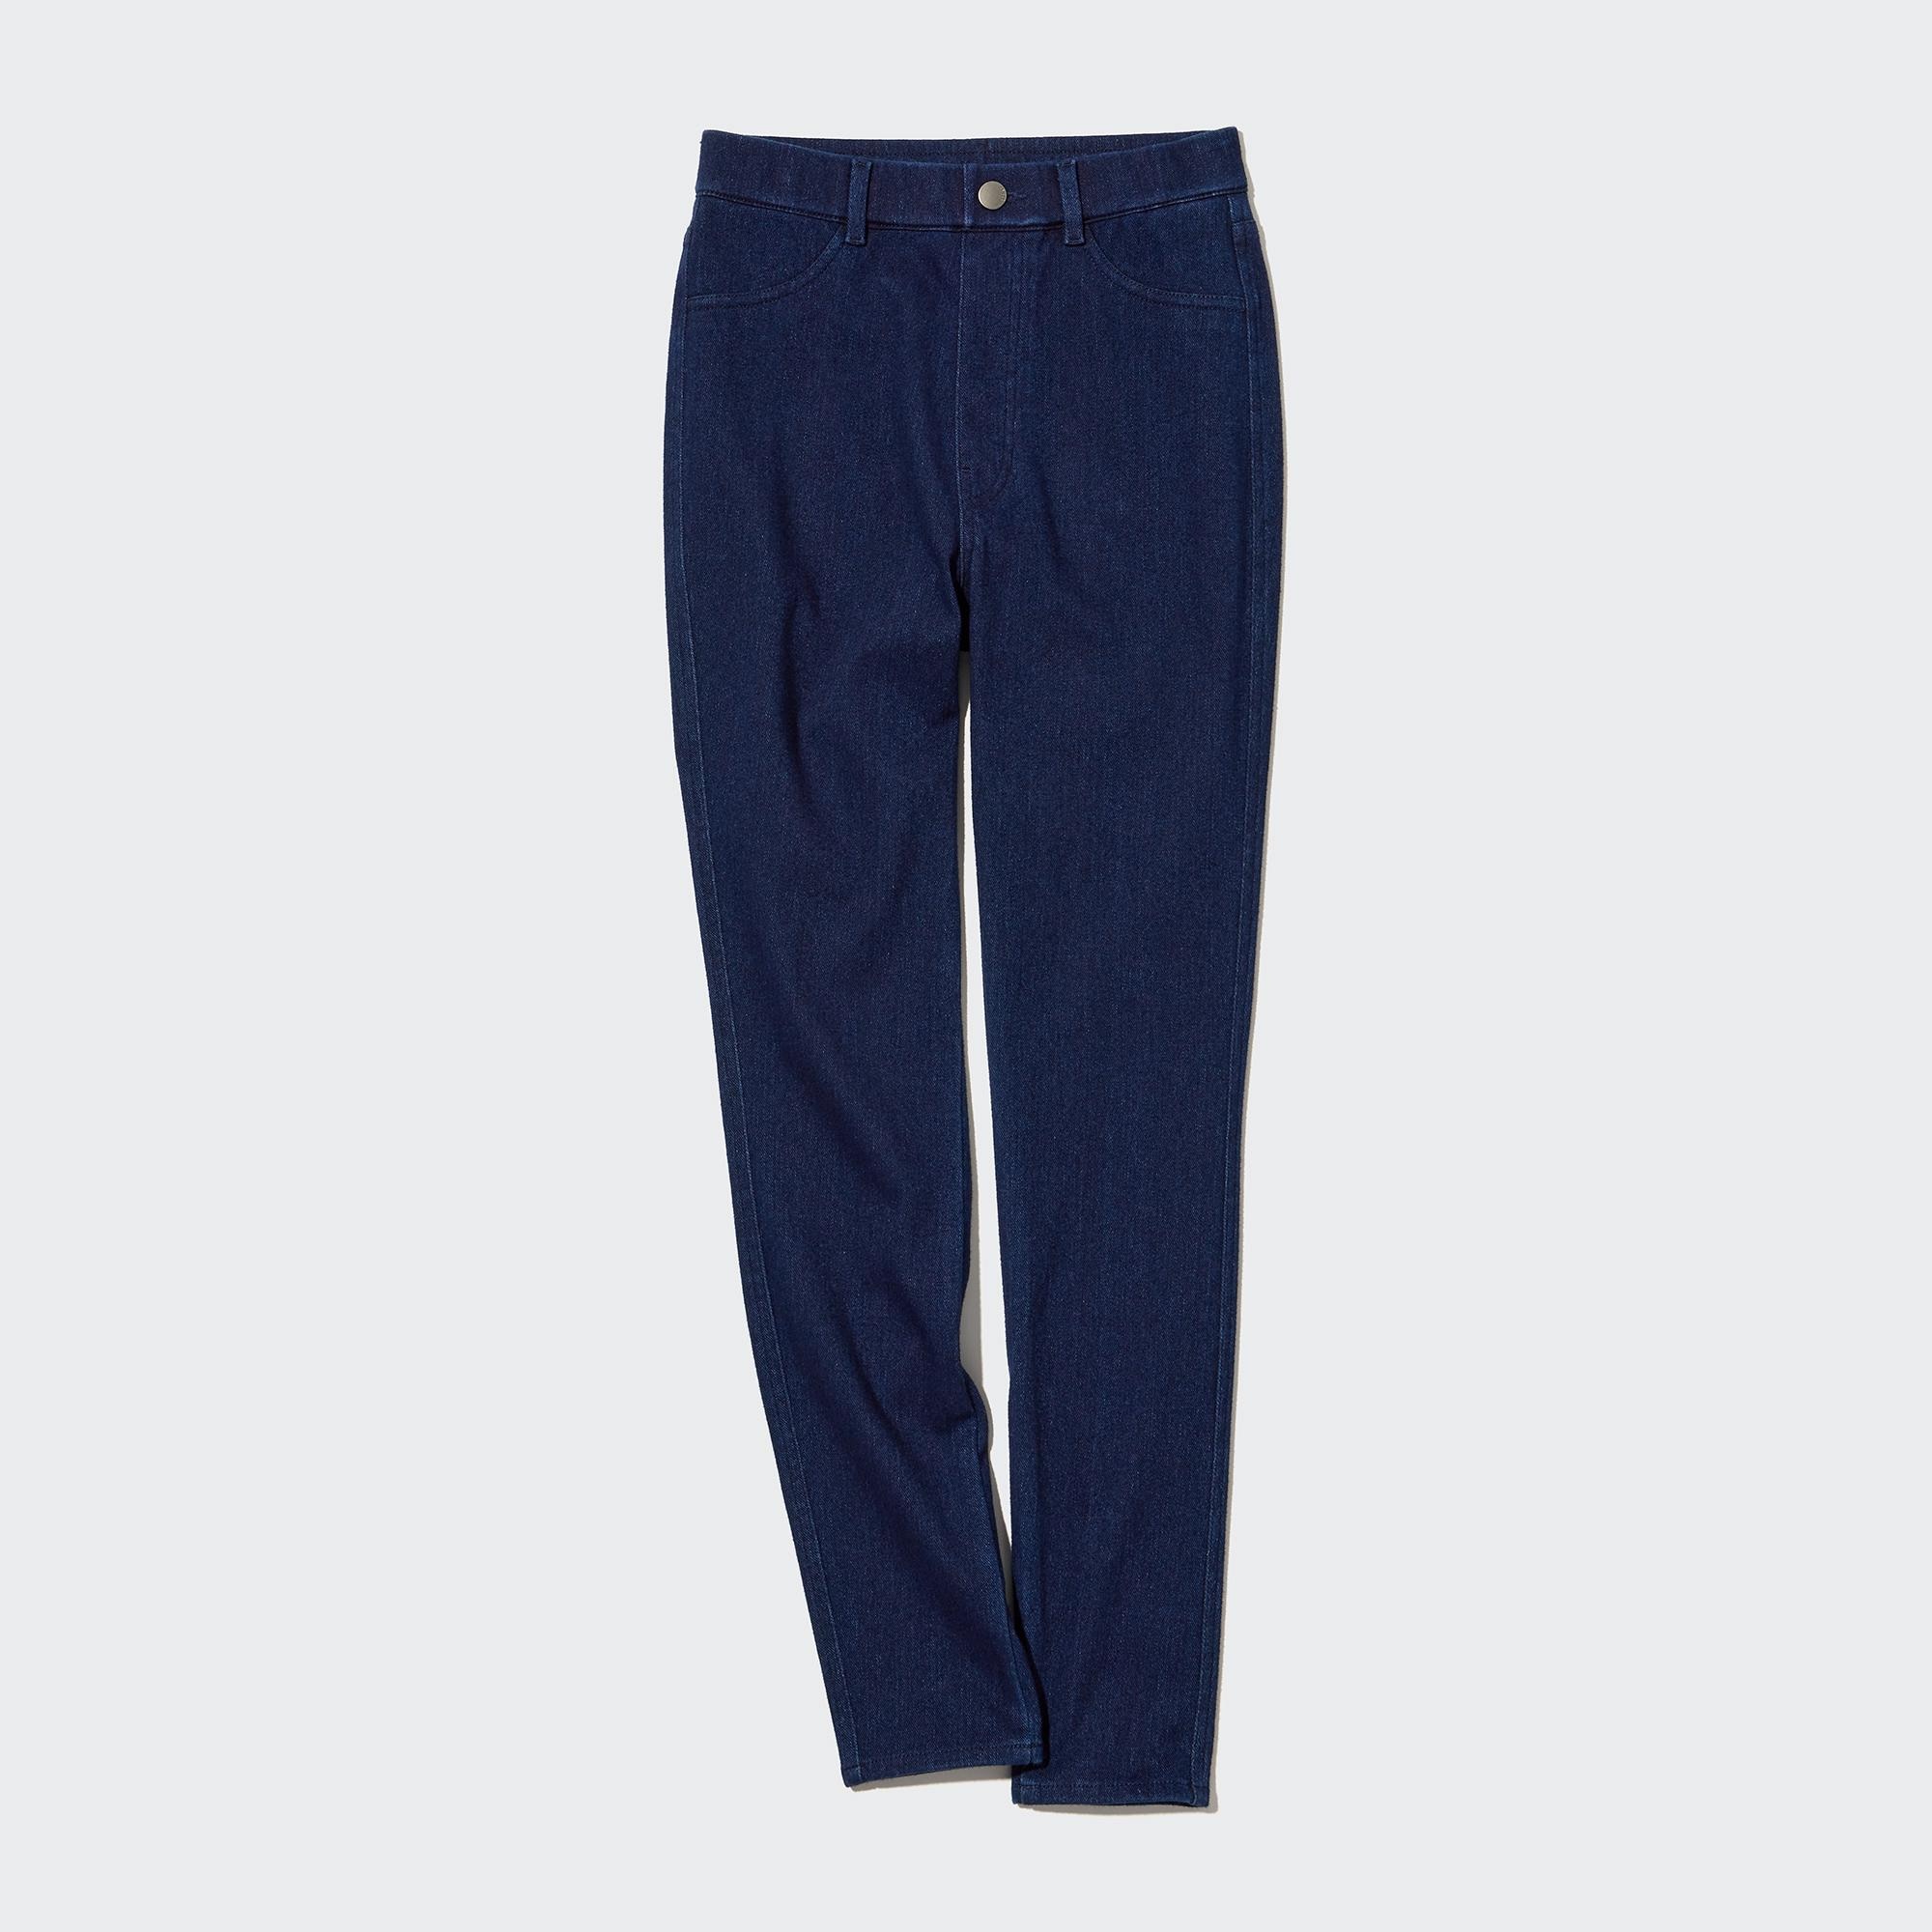 Uniqlo Ribbed Velour Ultra Stretch Leggings Trouser Pants Navy